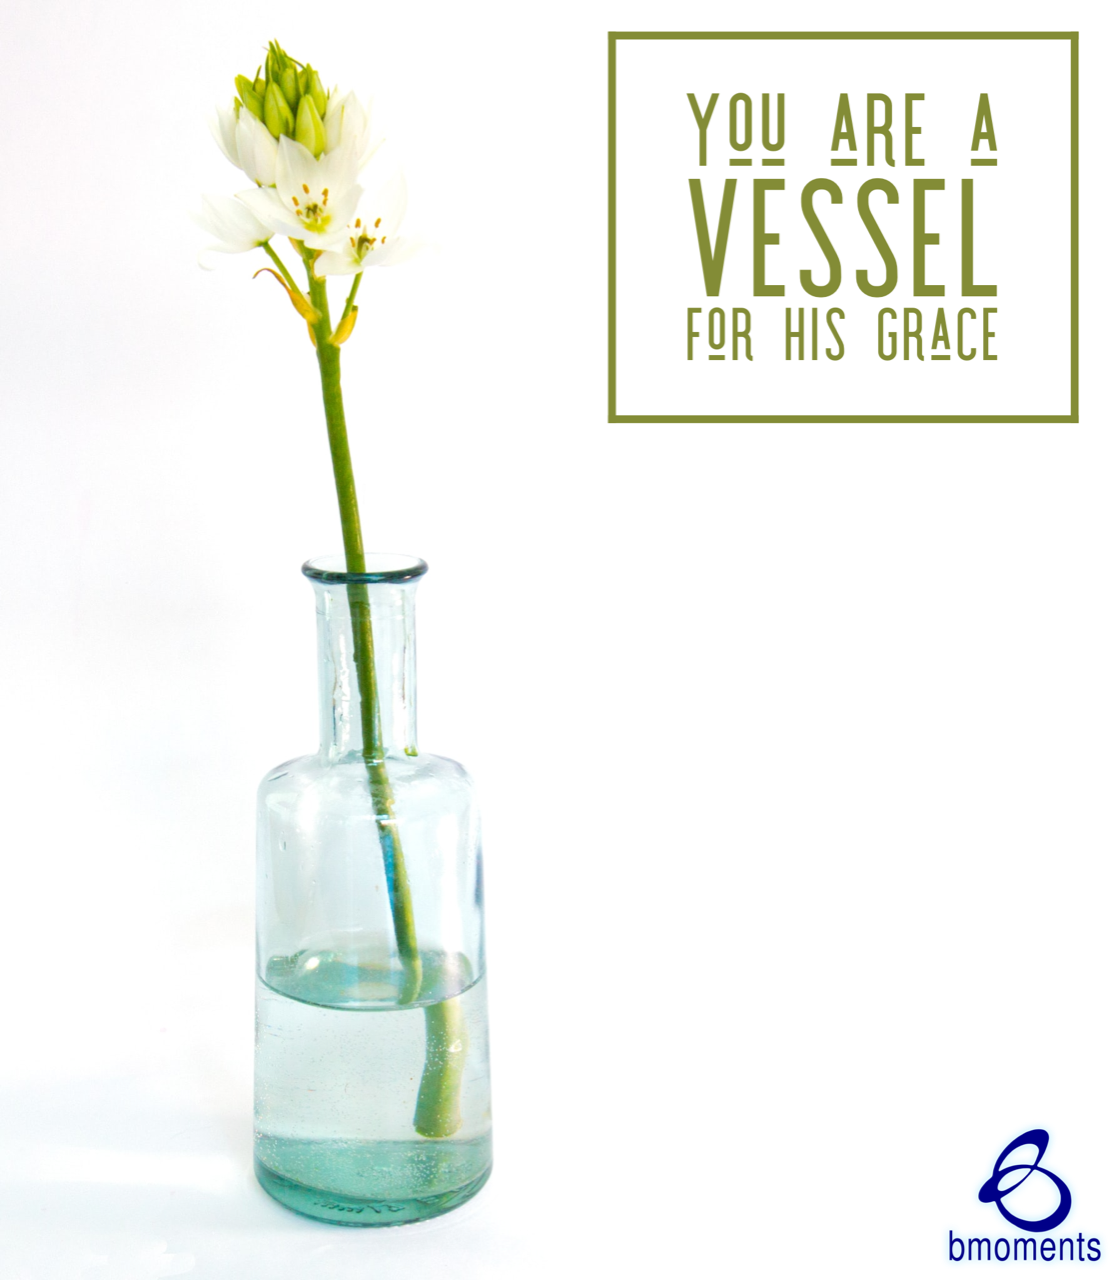 You Are a Vessel for Christ’s Grace